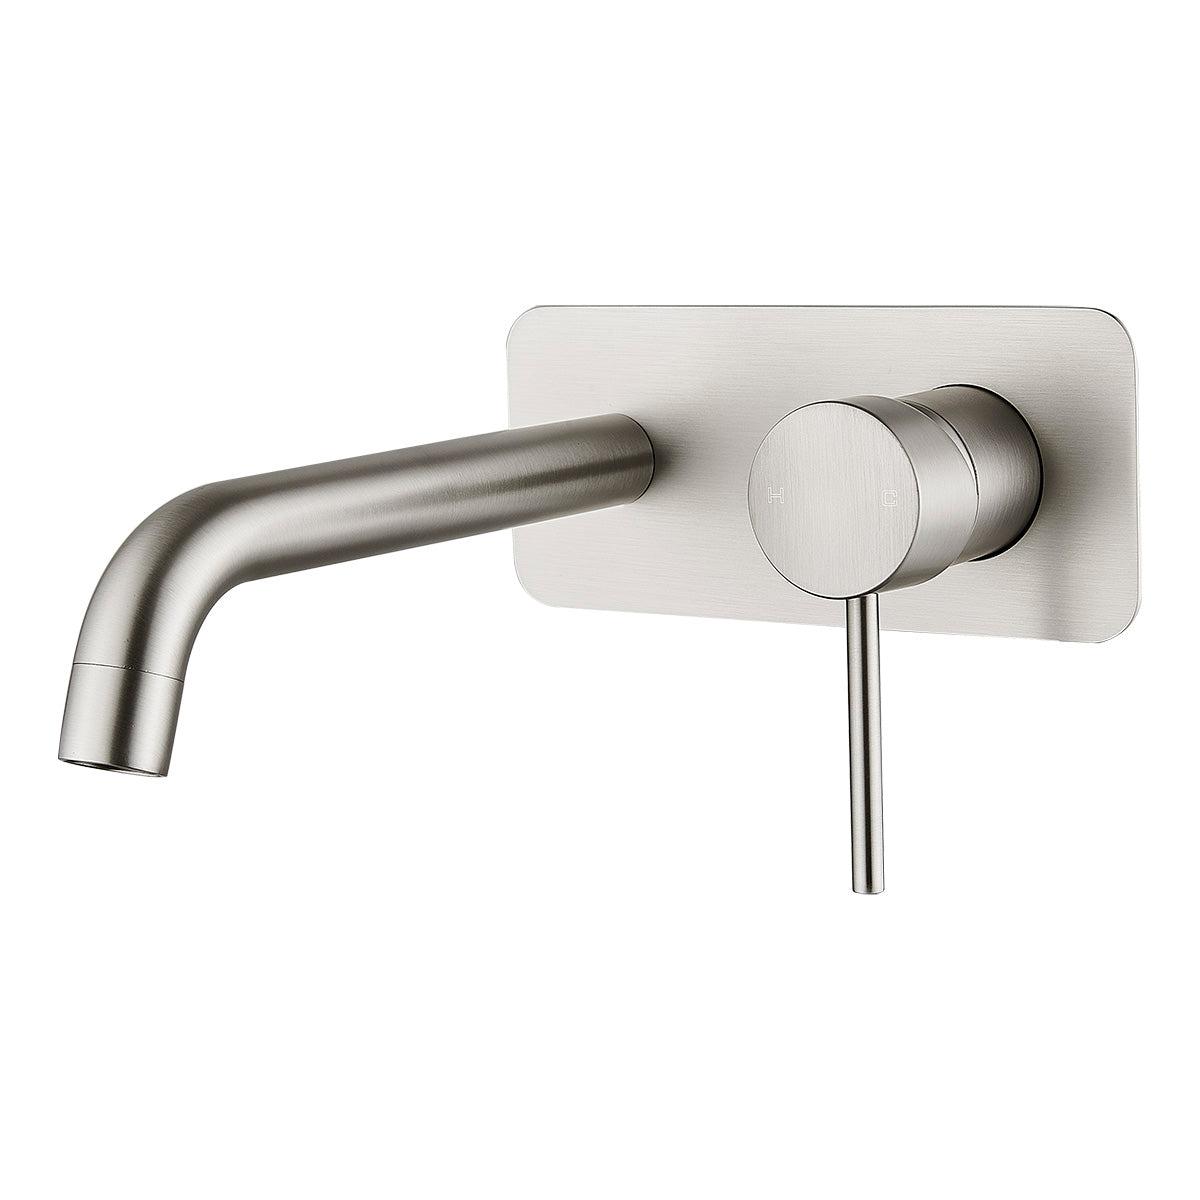 HELLYCAR IDEAL WALL MIXER WITH OUTLET 209MM BRUSHED NICKEL